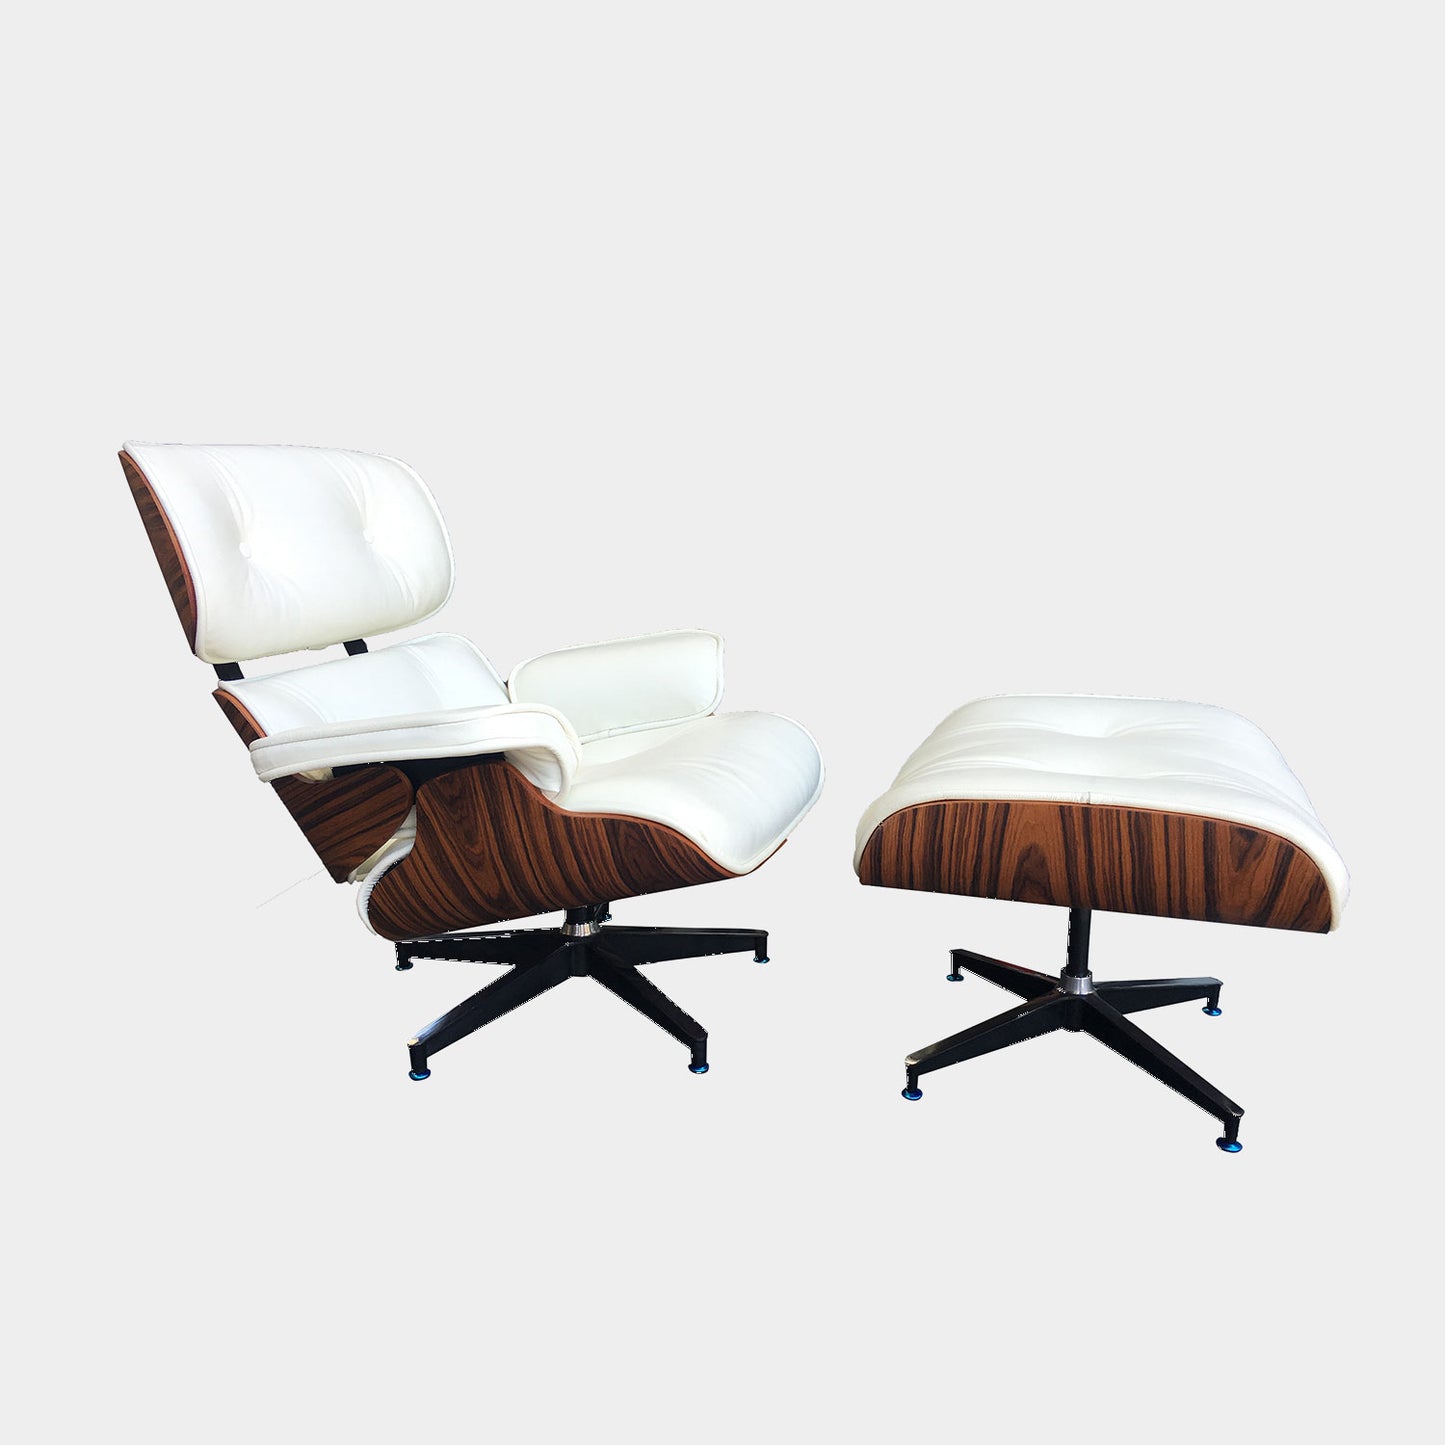 Showroom Sale Item- Catalina Loungers Chairs only- No Footstools